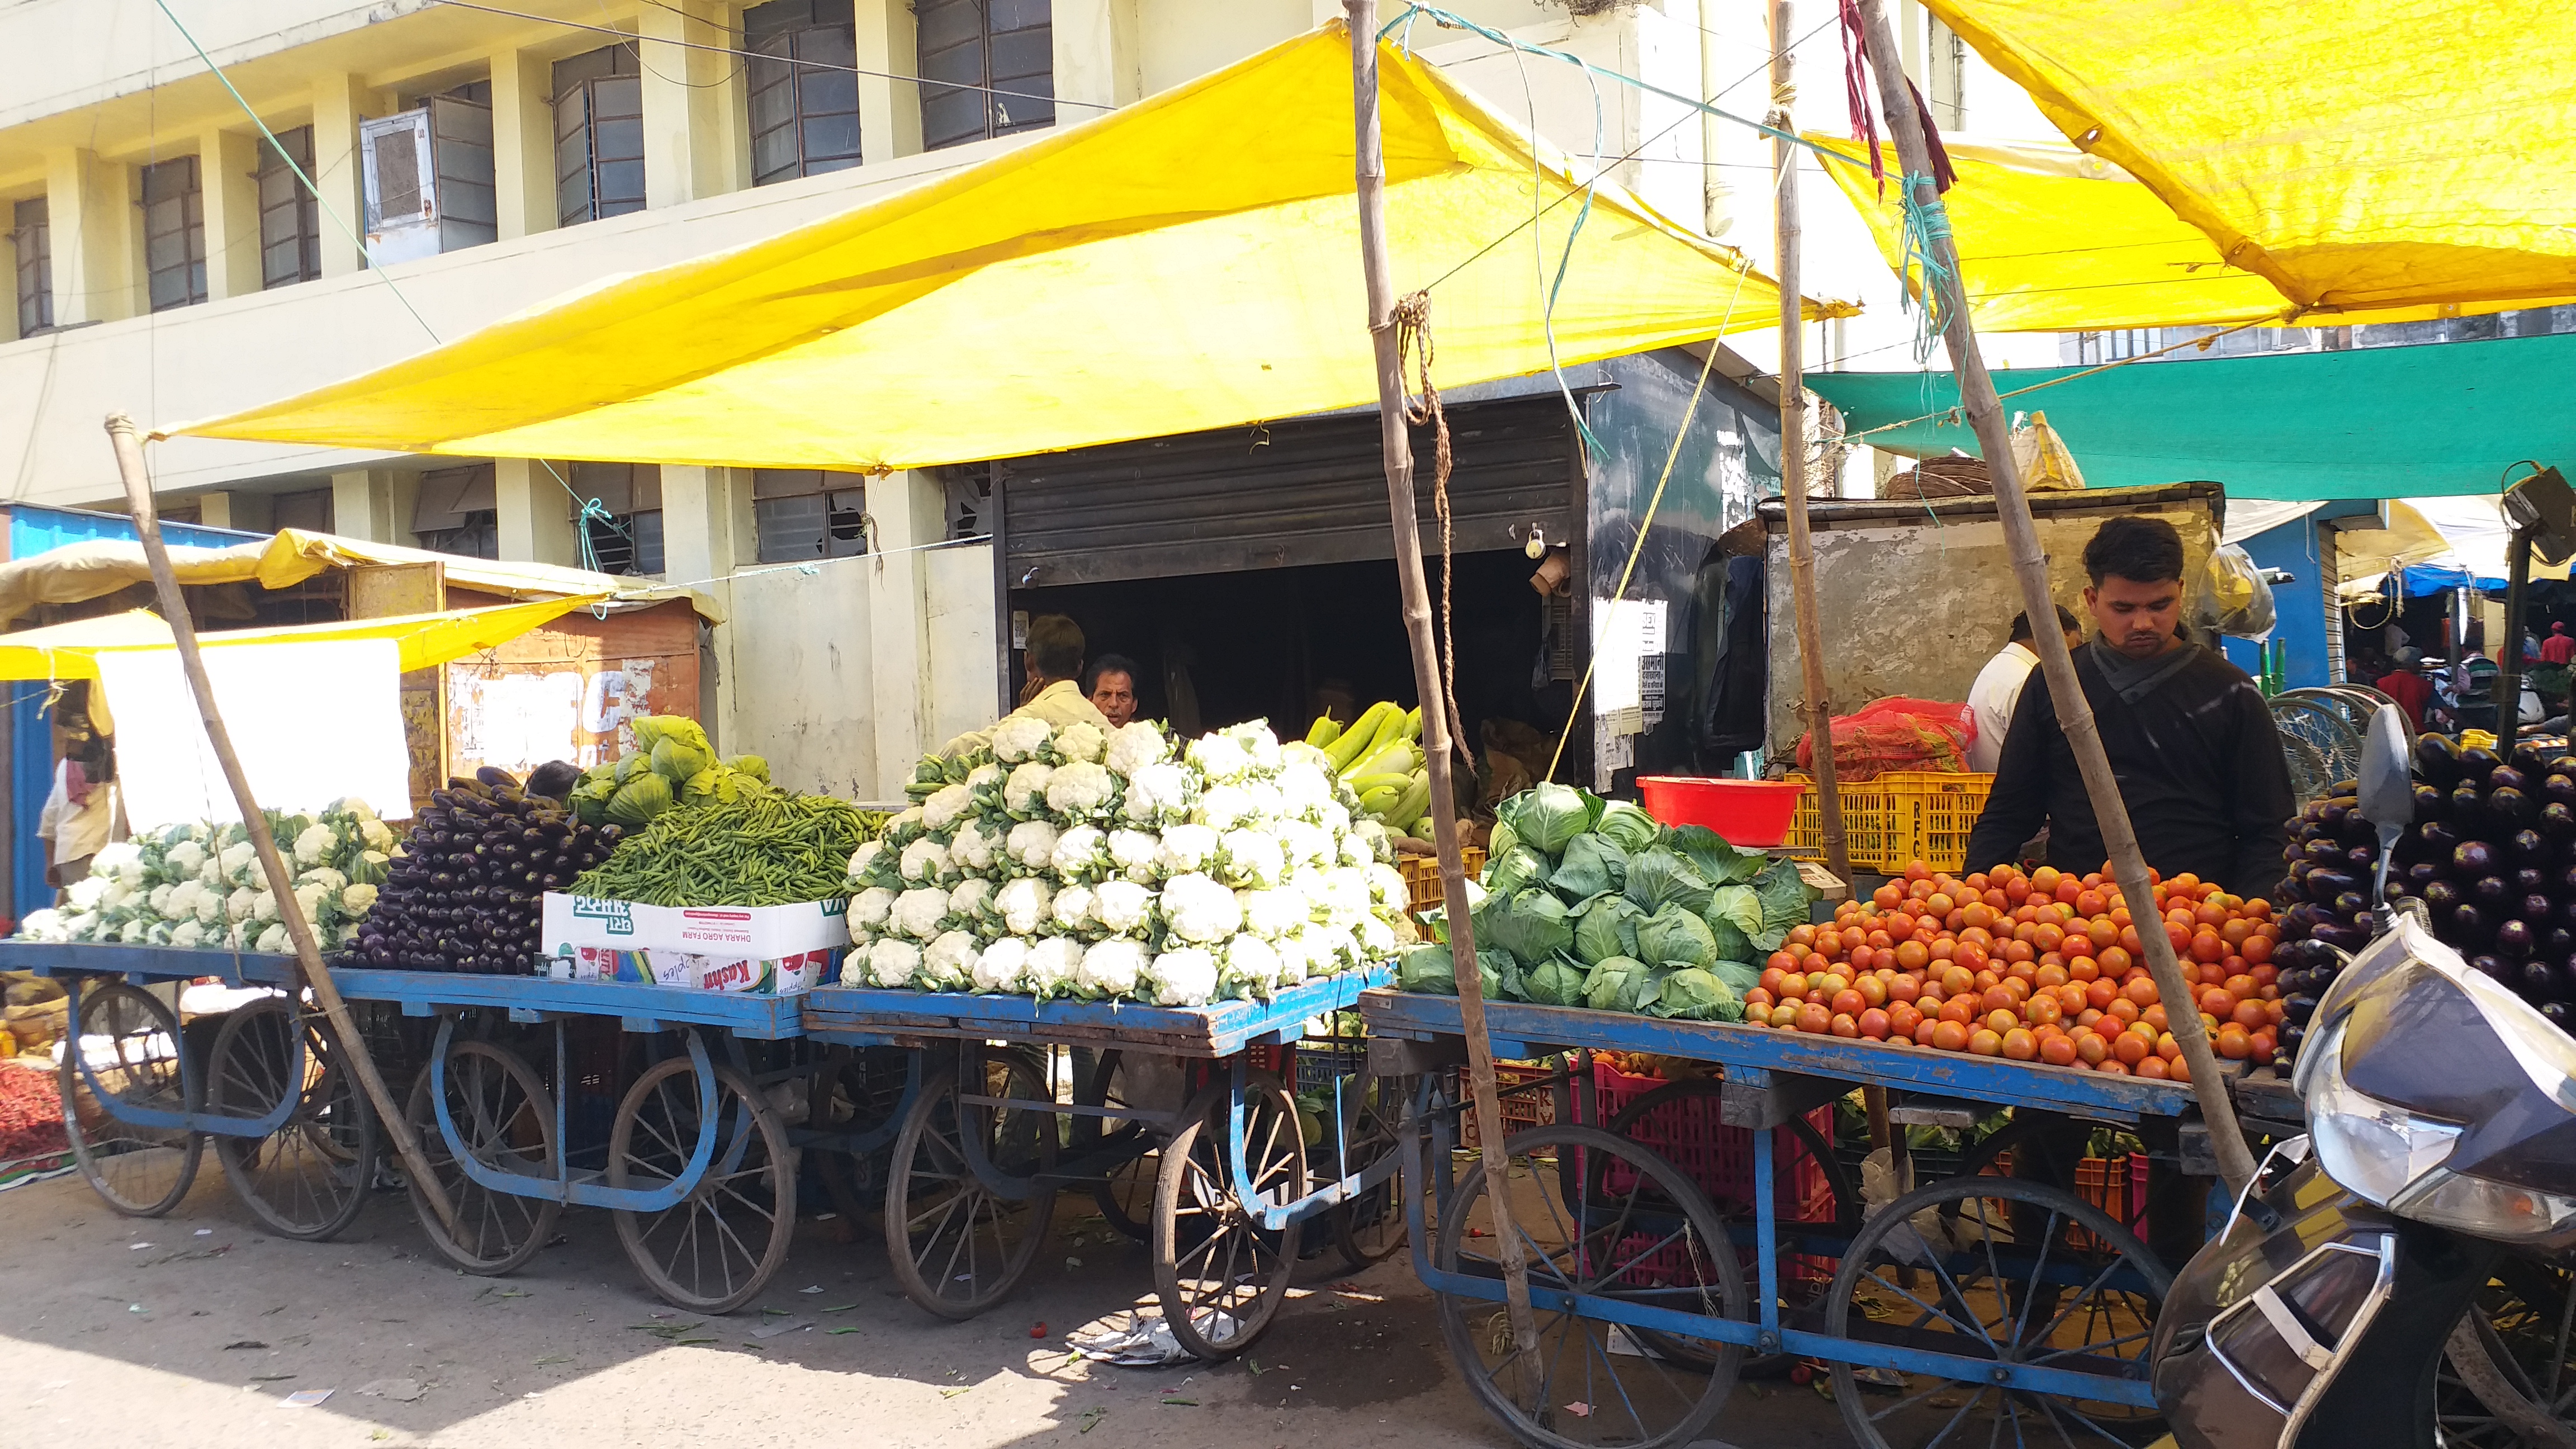 rising prices of green vegetables